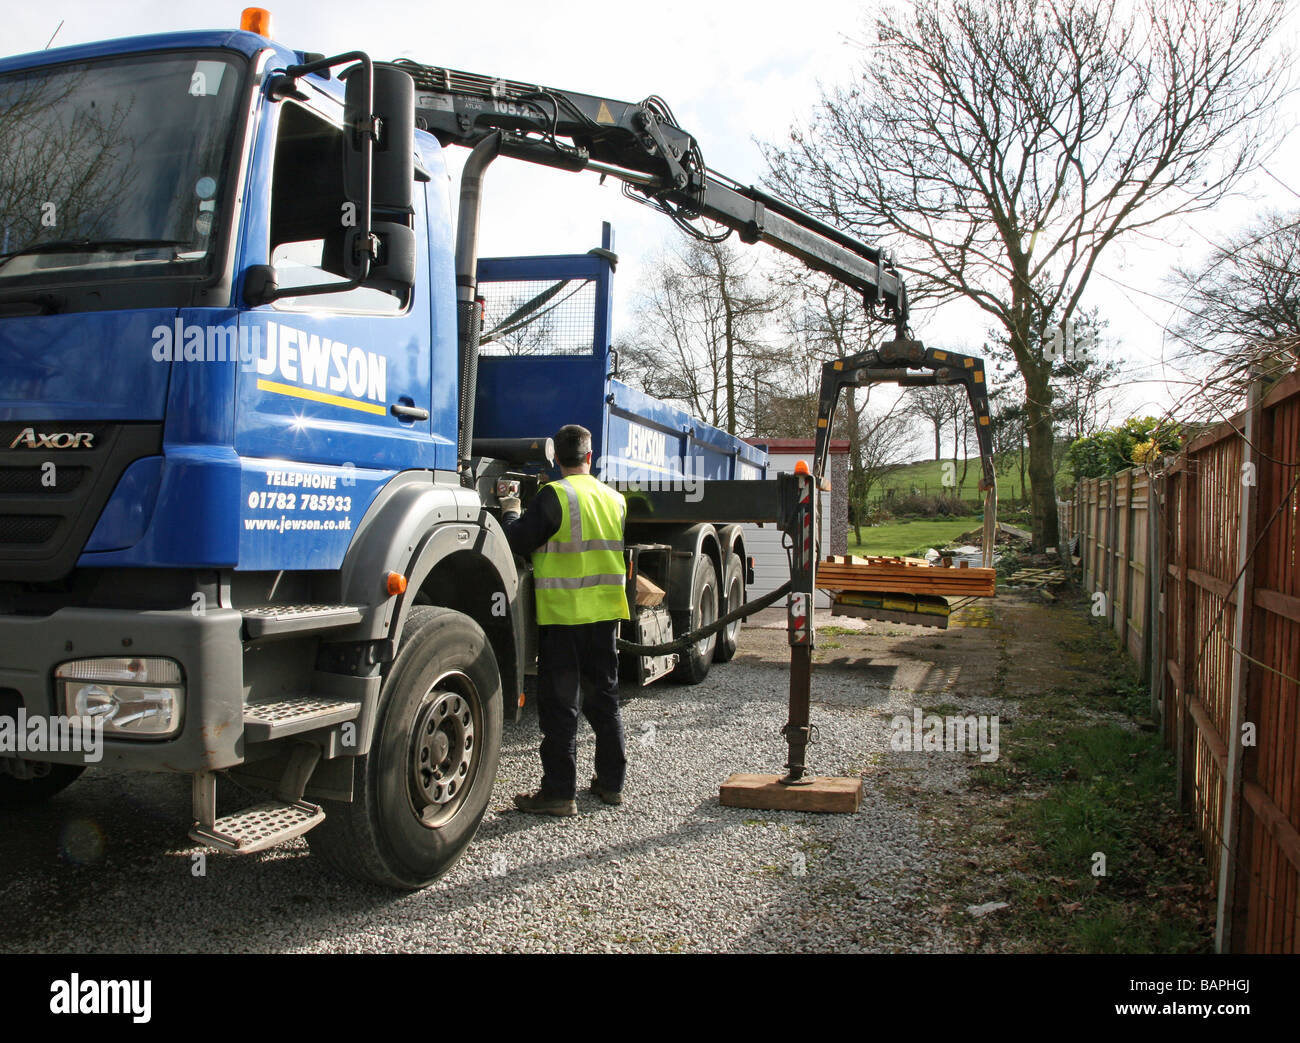 A builder's merchant delivering wooden fence panels with a lorry with a hydraulic lifting arm Stock Photo